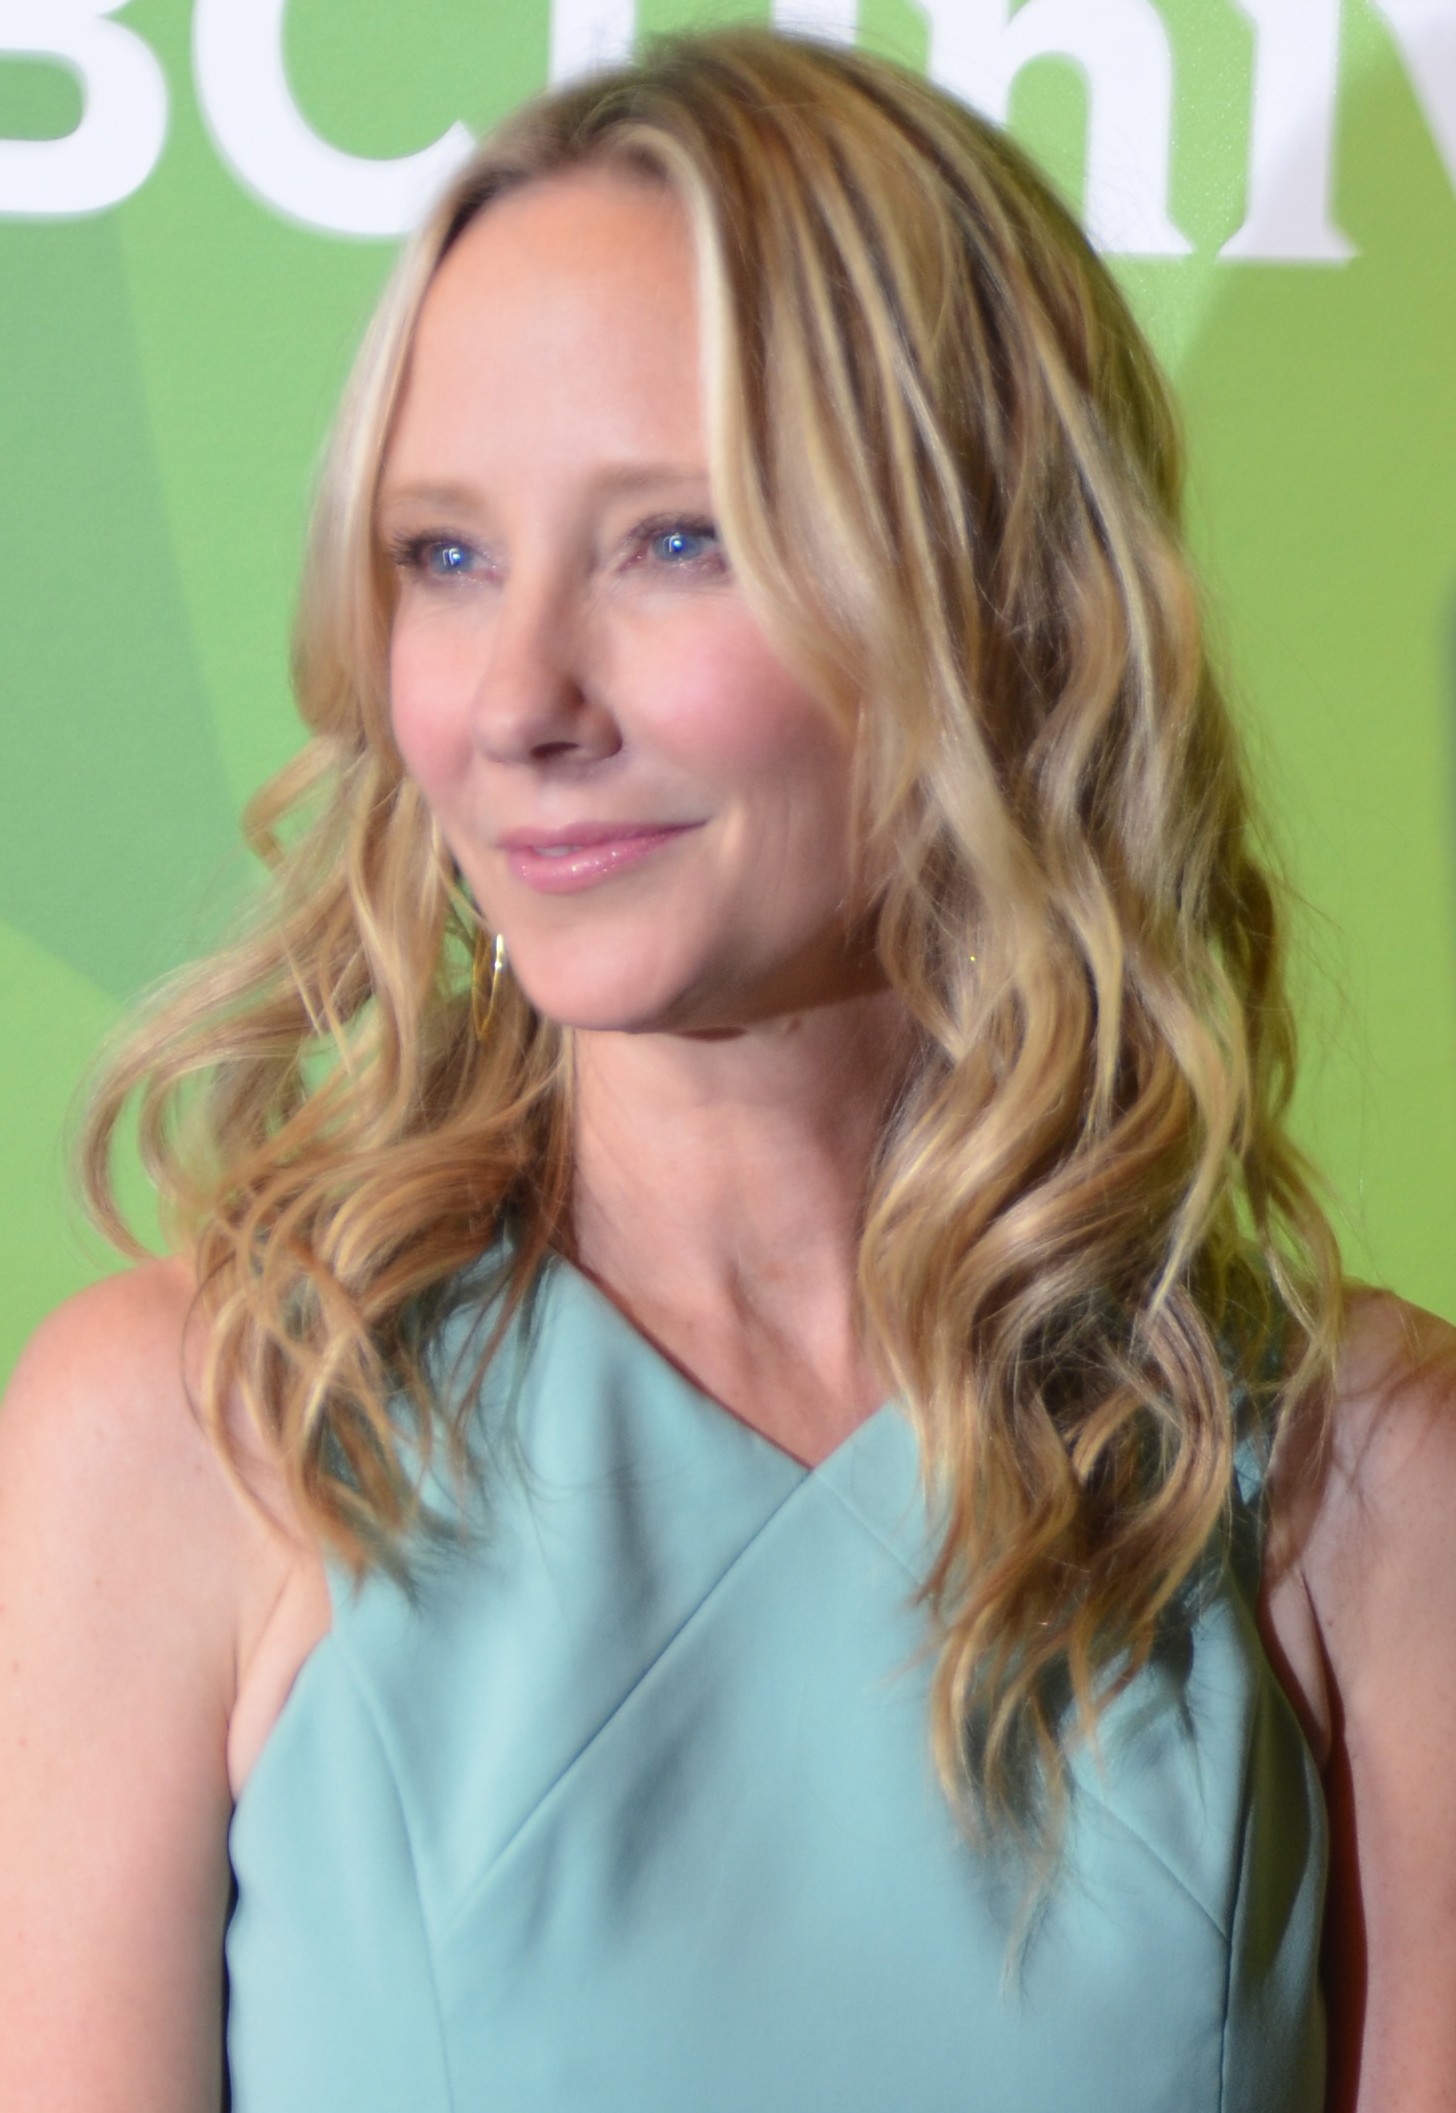 Entertainment News Roundup: Hollywood actress Anne Heche in coma since fiery car cras; Director Lars von Trier diagnosed with Parkinson's disease and more